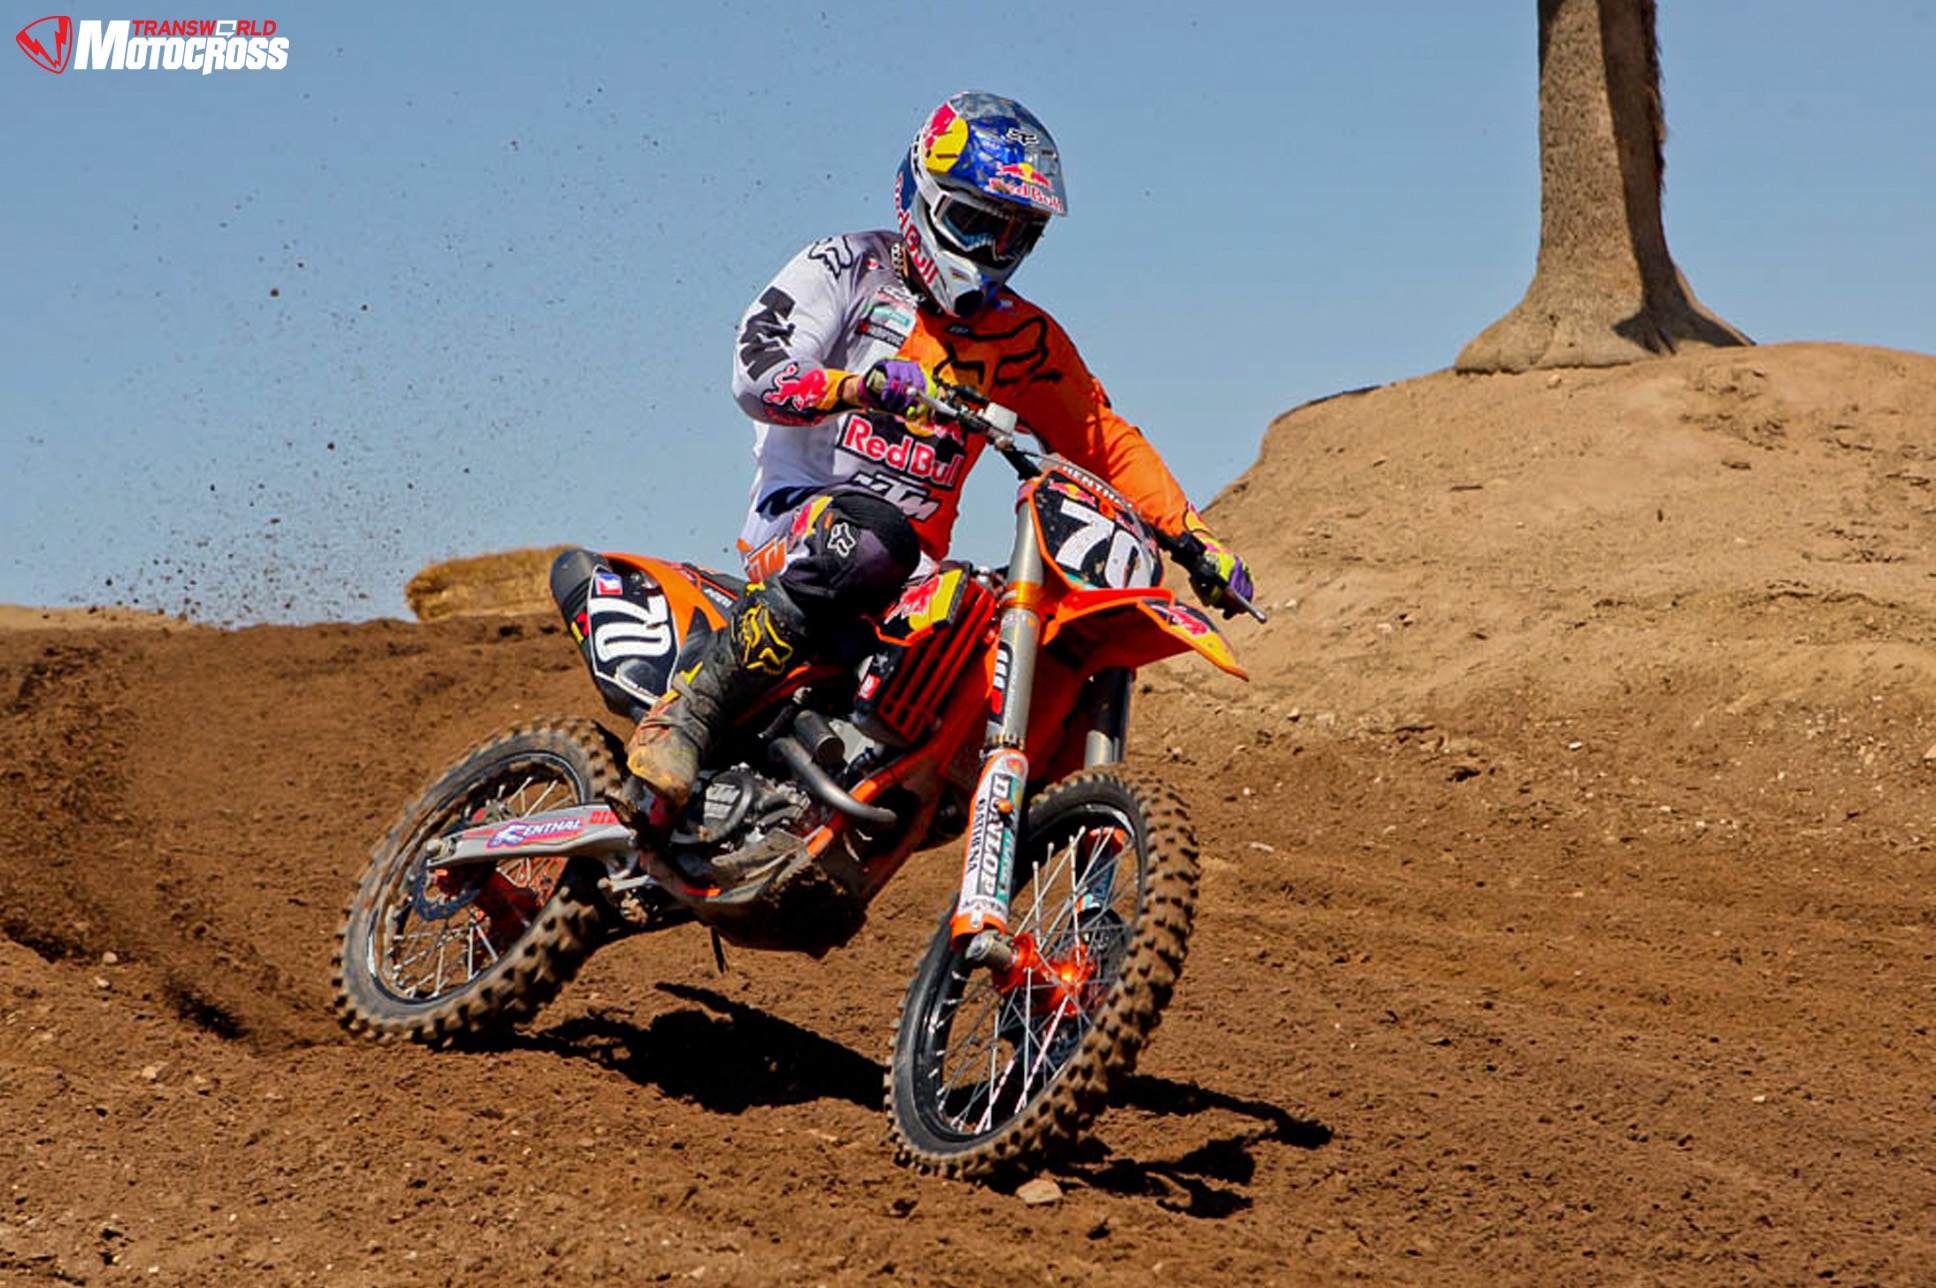 Red Bull Motocross Wallpapers For Iphone - Hd Motocross Red Bull , HD Wallpaper & Backgrounds